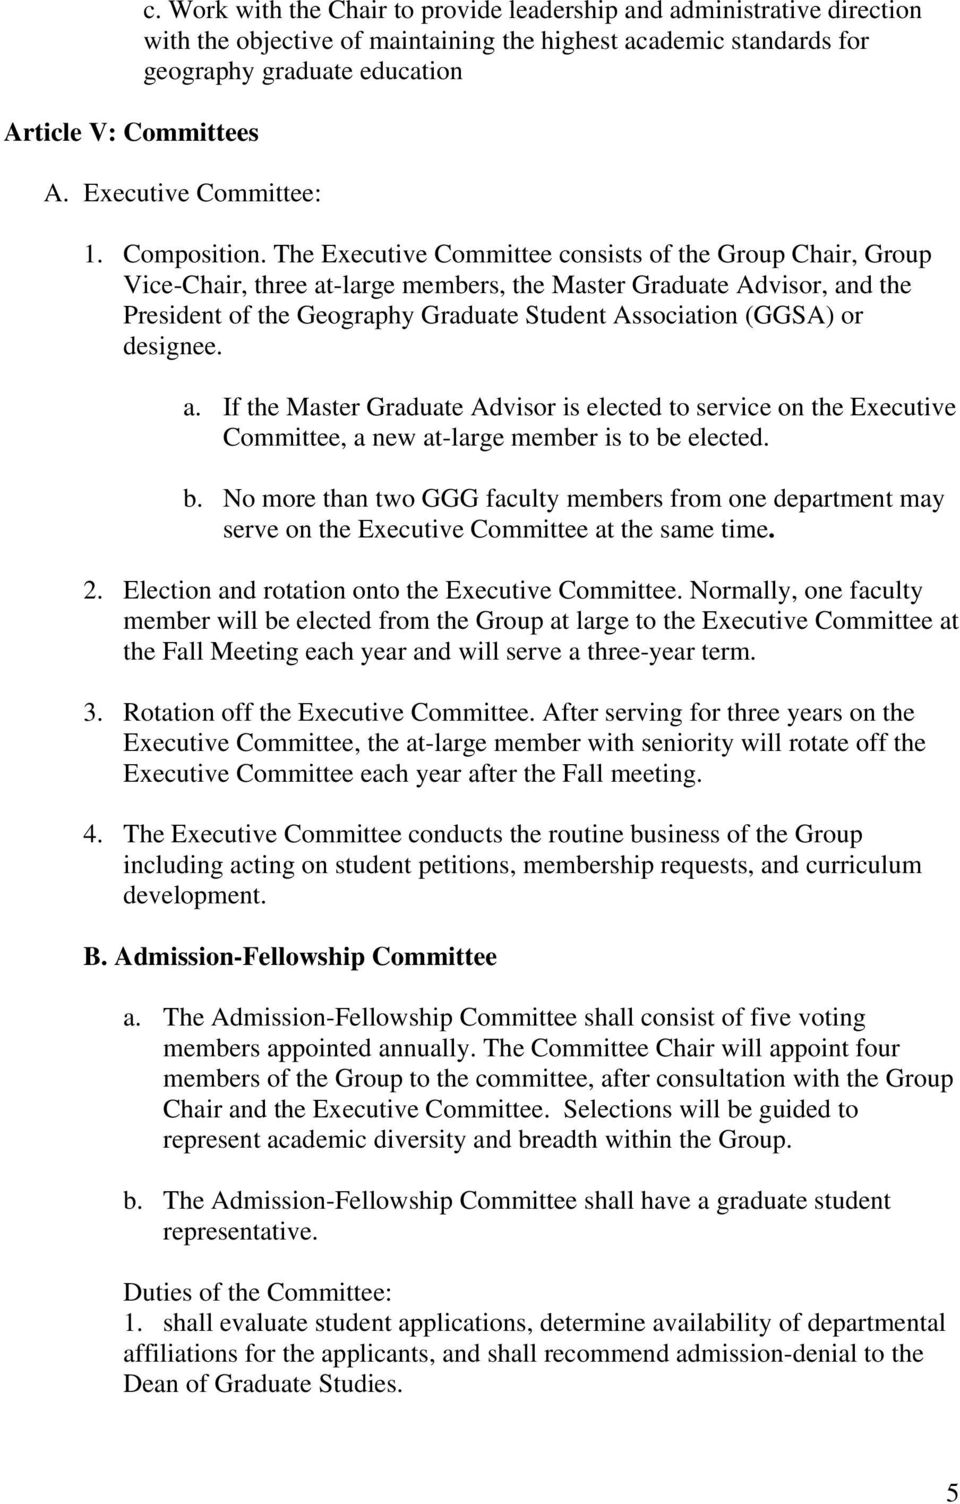 The Executive Committee consists of the Group Chair, Group Vice-Chair, three at-large members, the Master Graduate Advisor, and the President of the Geography Graduate Student Association (GGSA) or